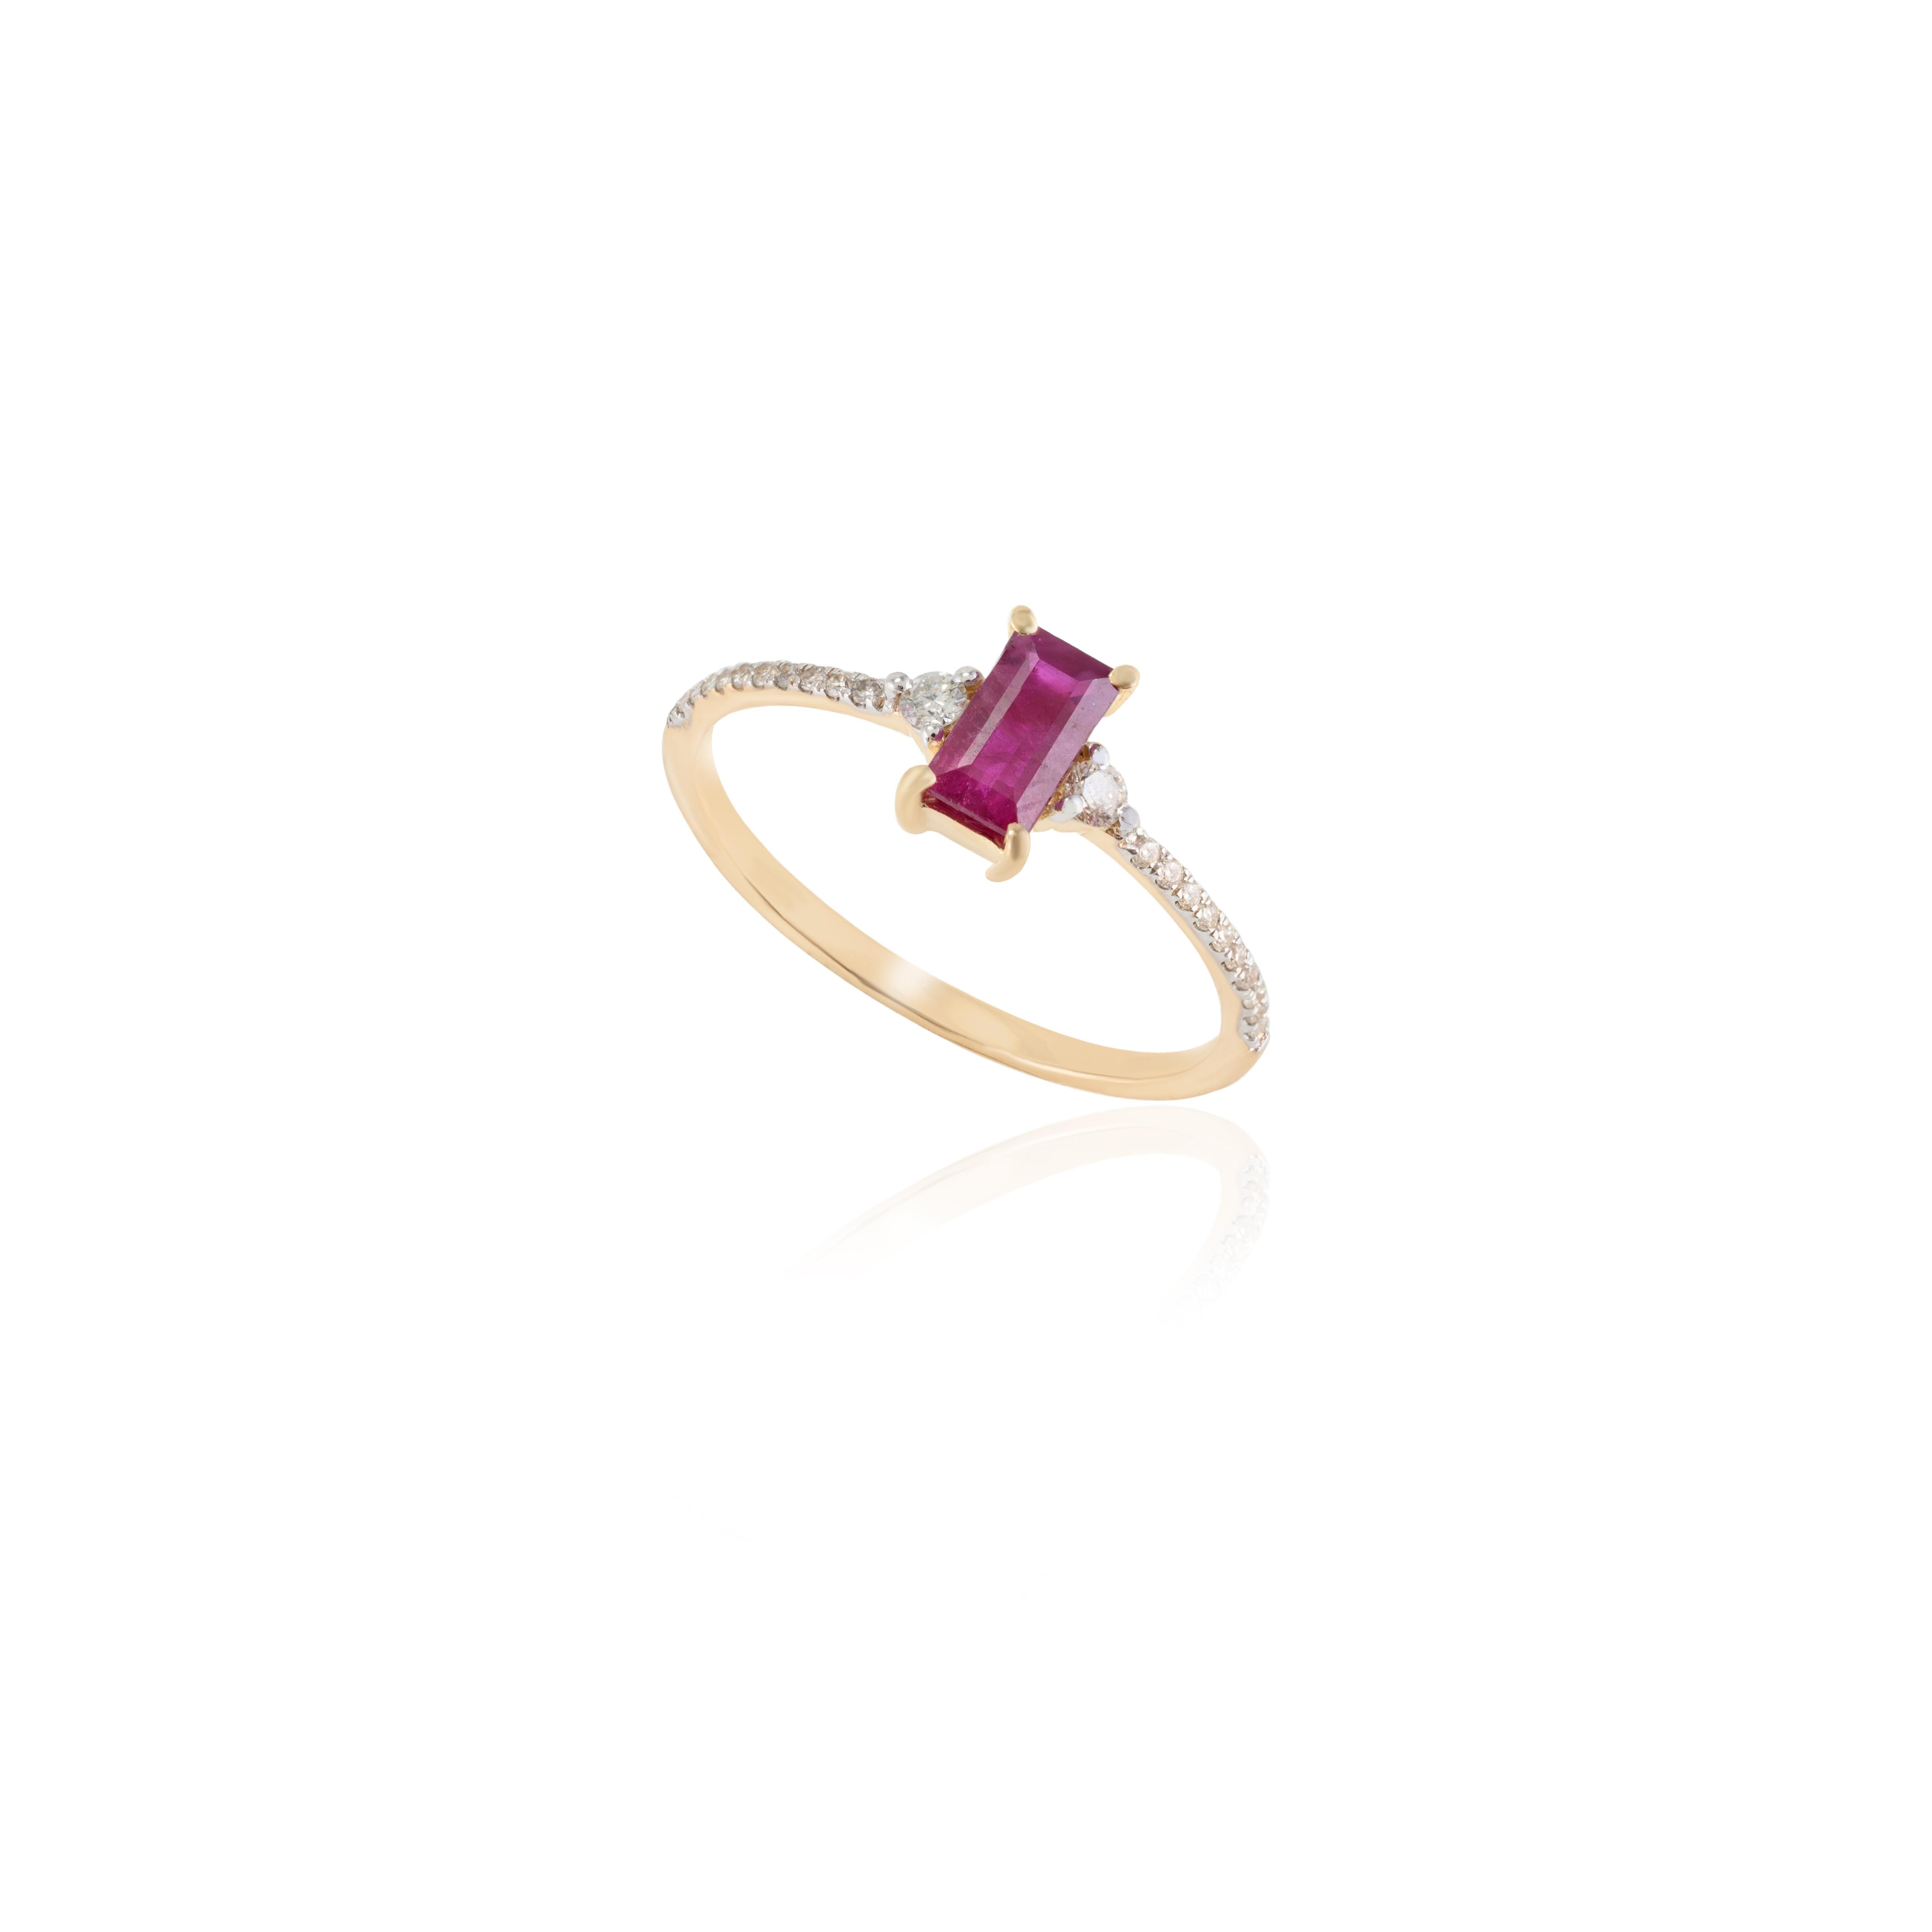 For Sale:  Baguette Cut Ruby and Diamond Stacking Ring in 14k Solid Yellow Gold For Her 5